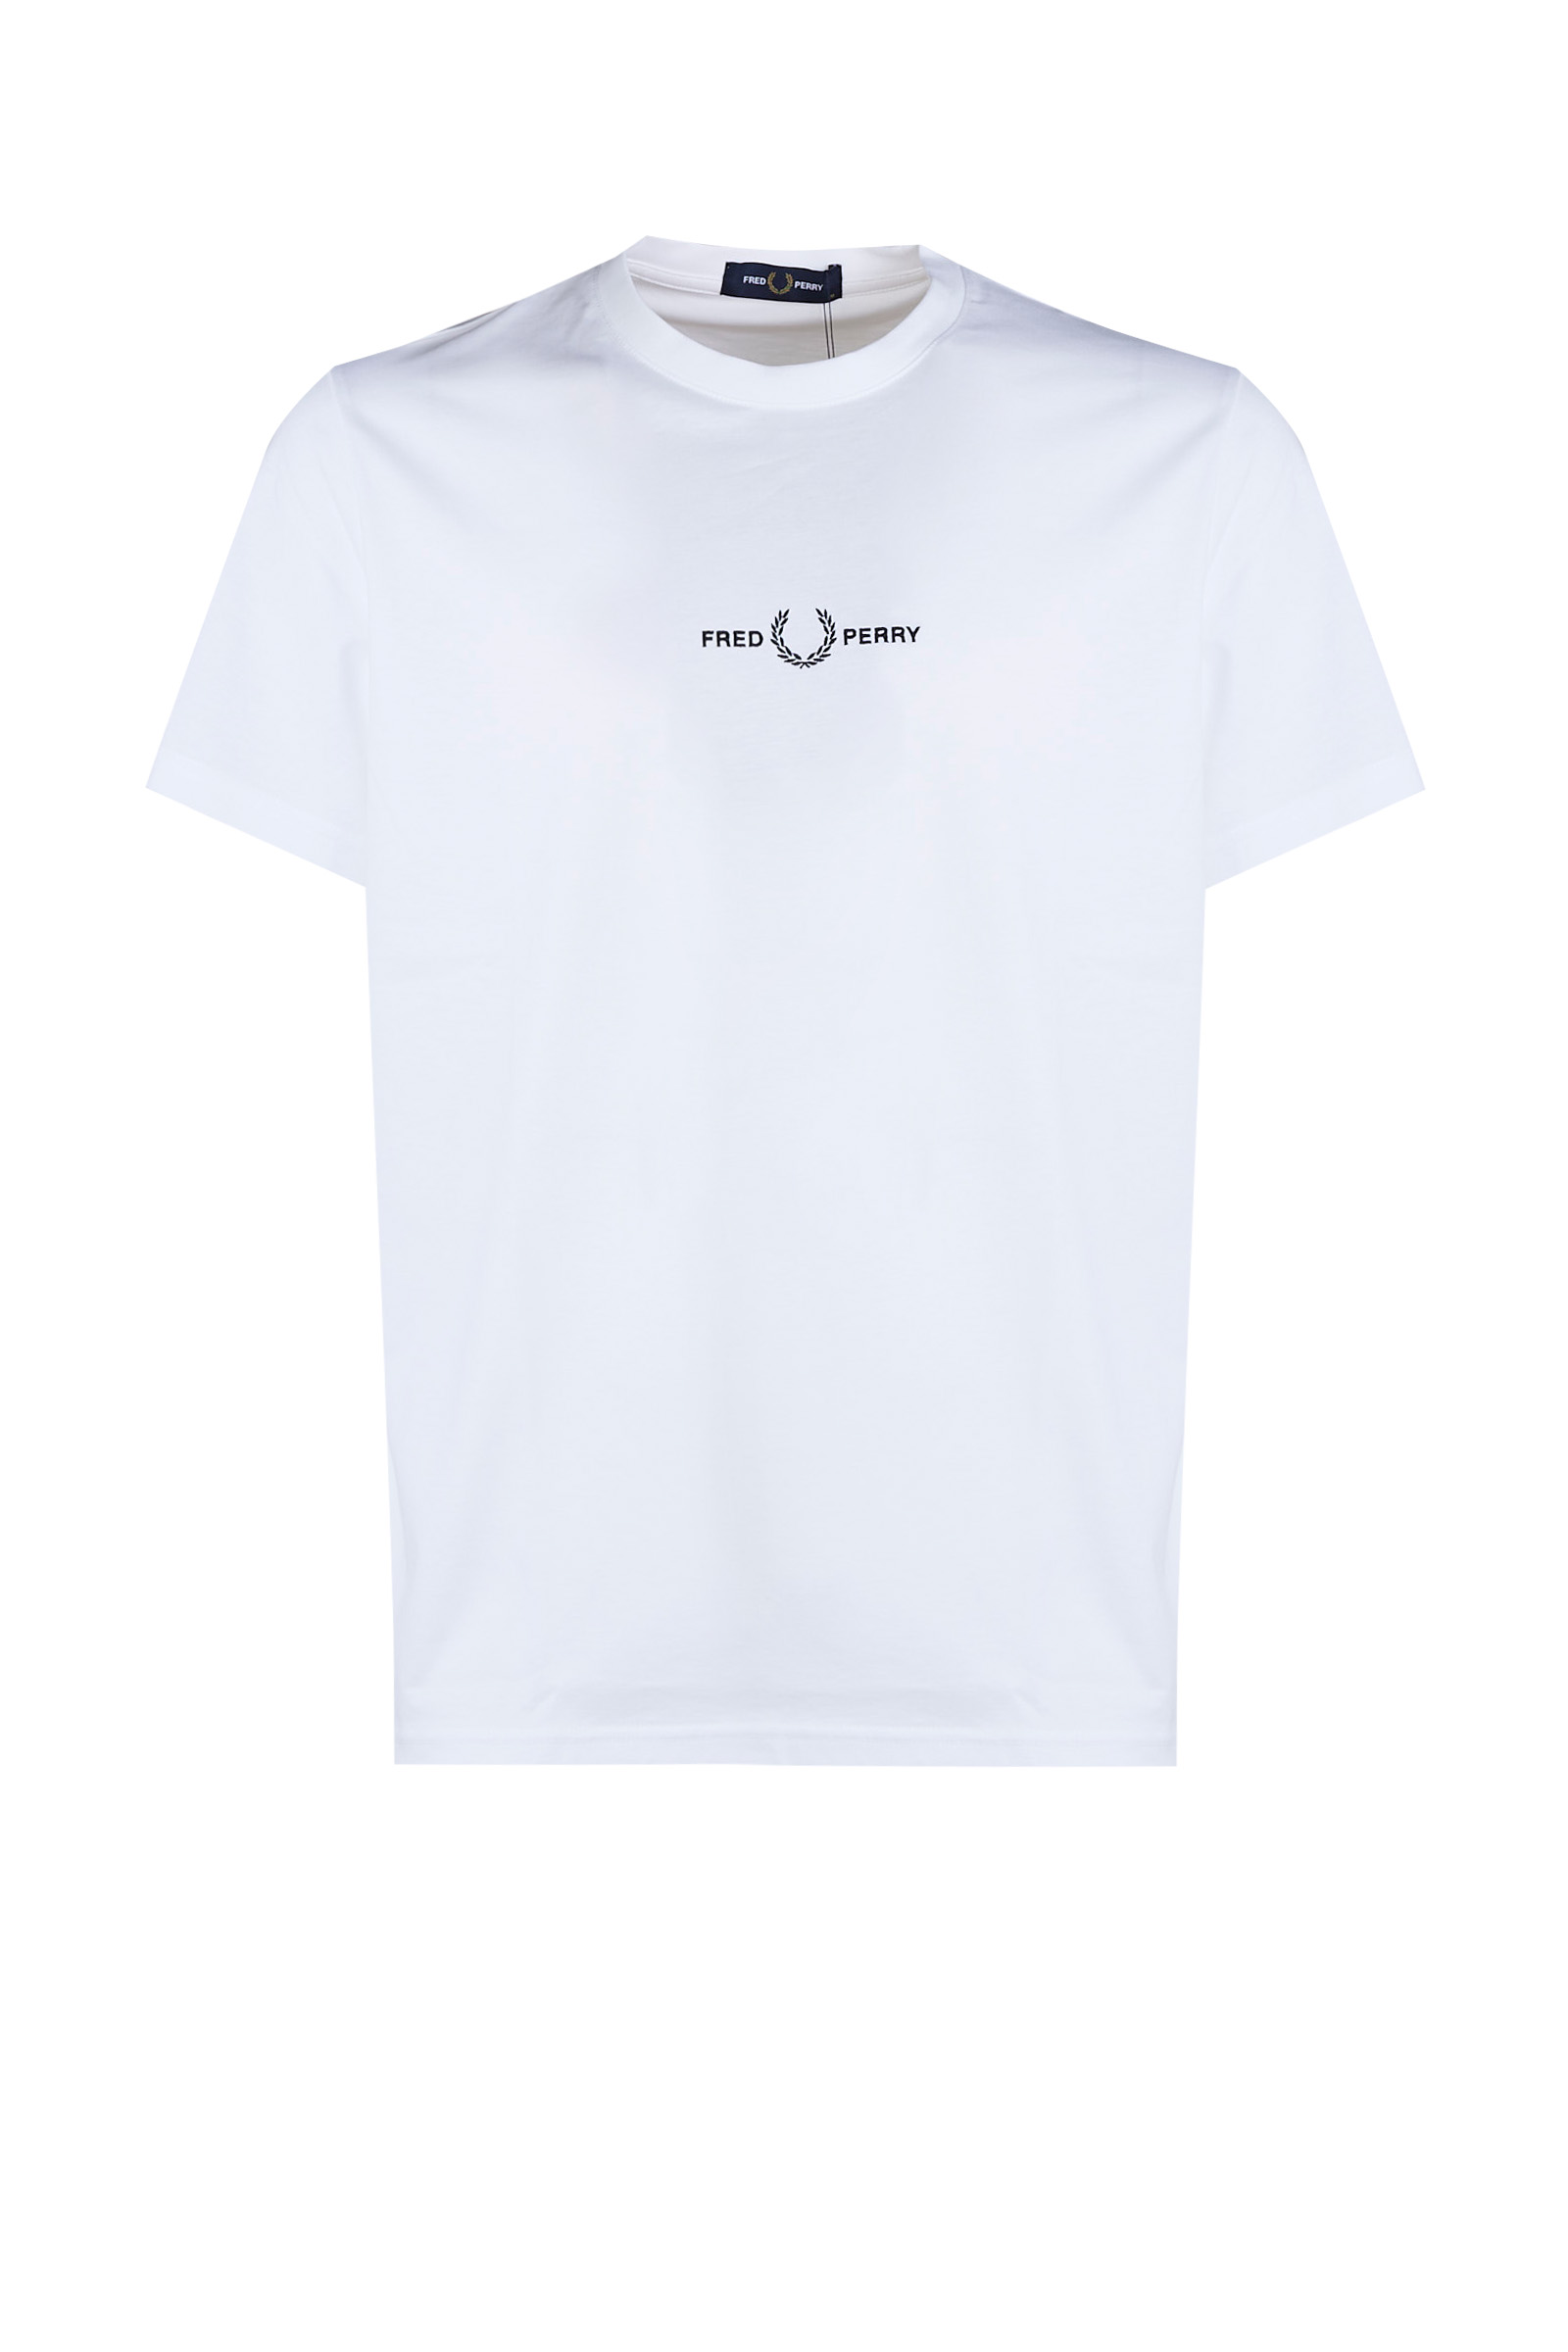 FRED PERRY T-SHIRT T-EMBROIDERED M4580 100 BIANCO UOMO